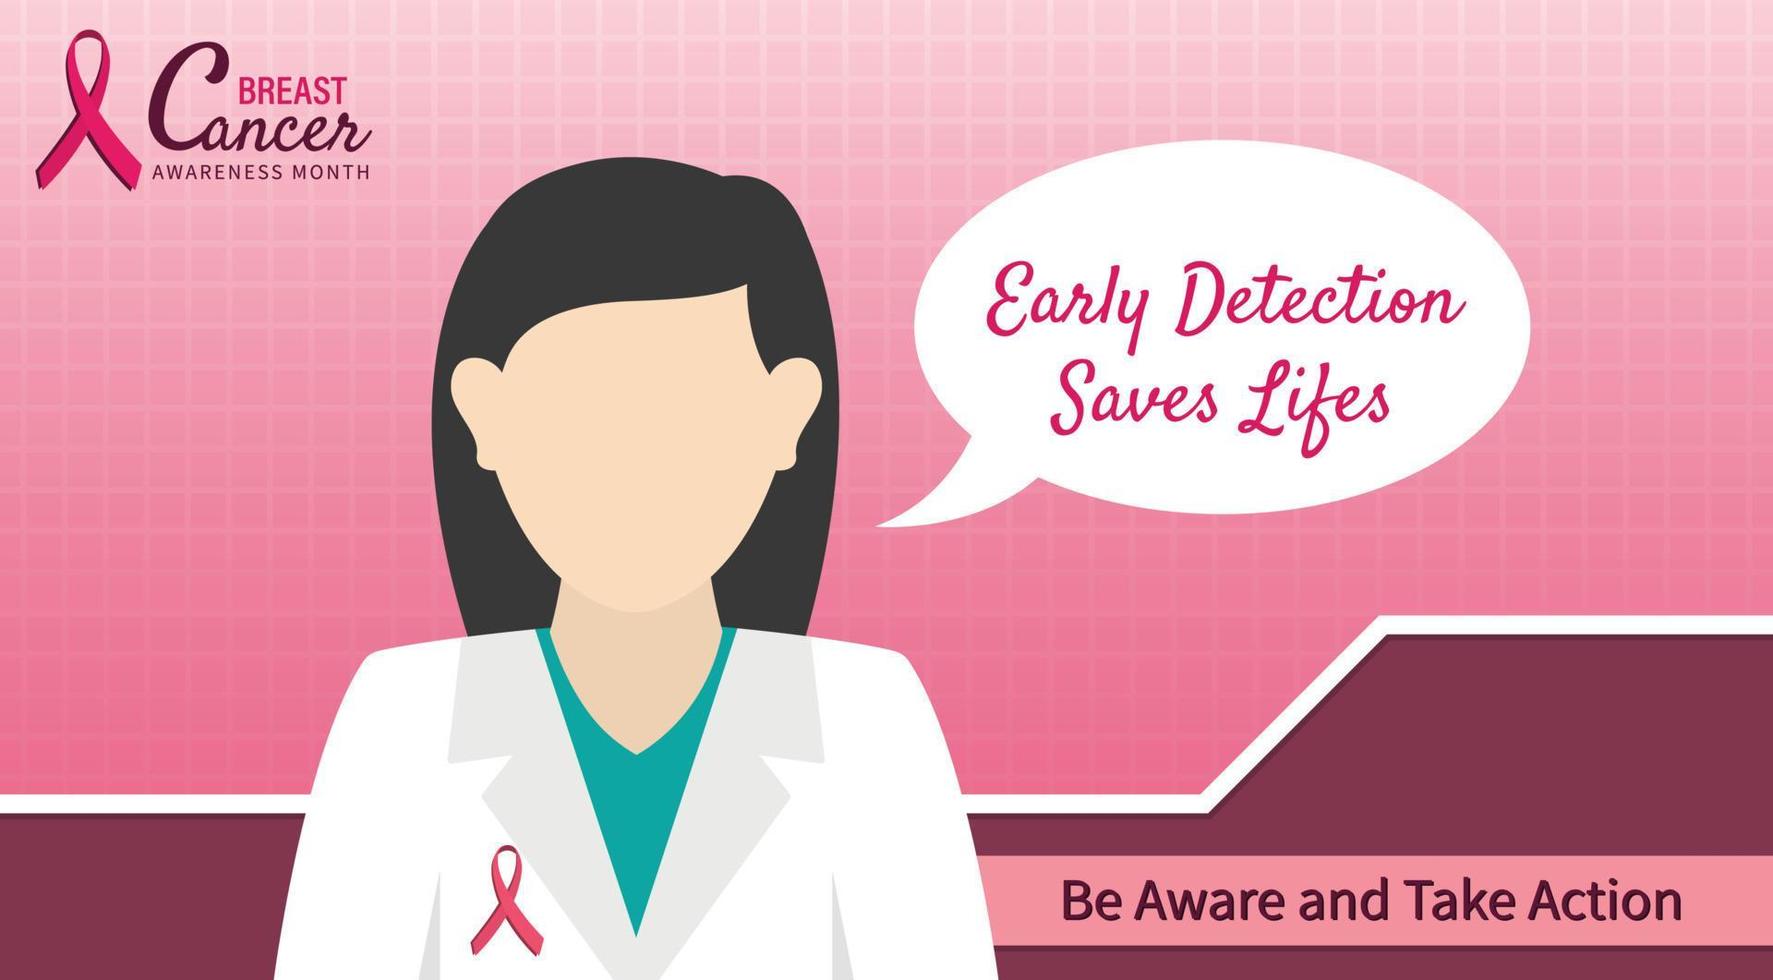 Breast cancer awareness month quotes with doctor animated icon illustration wallpaper design vector